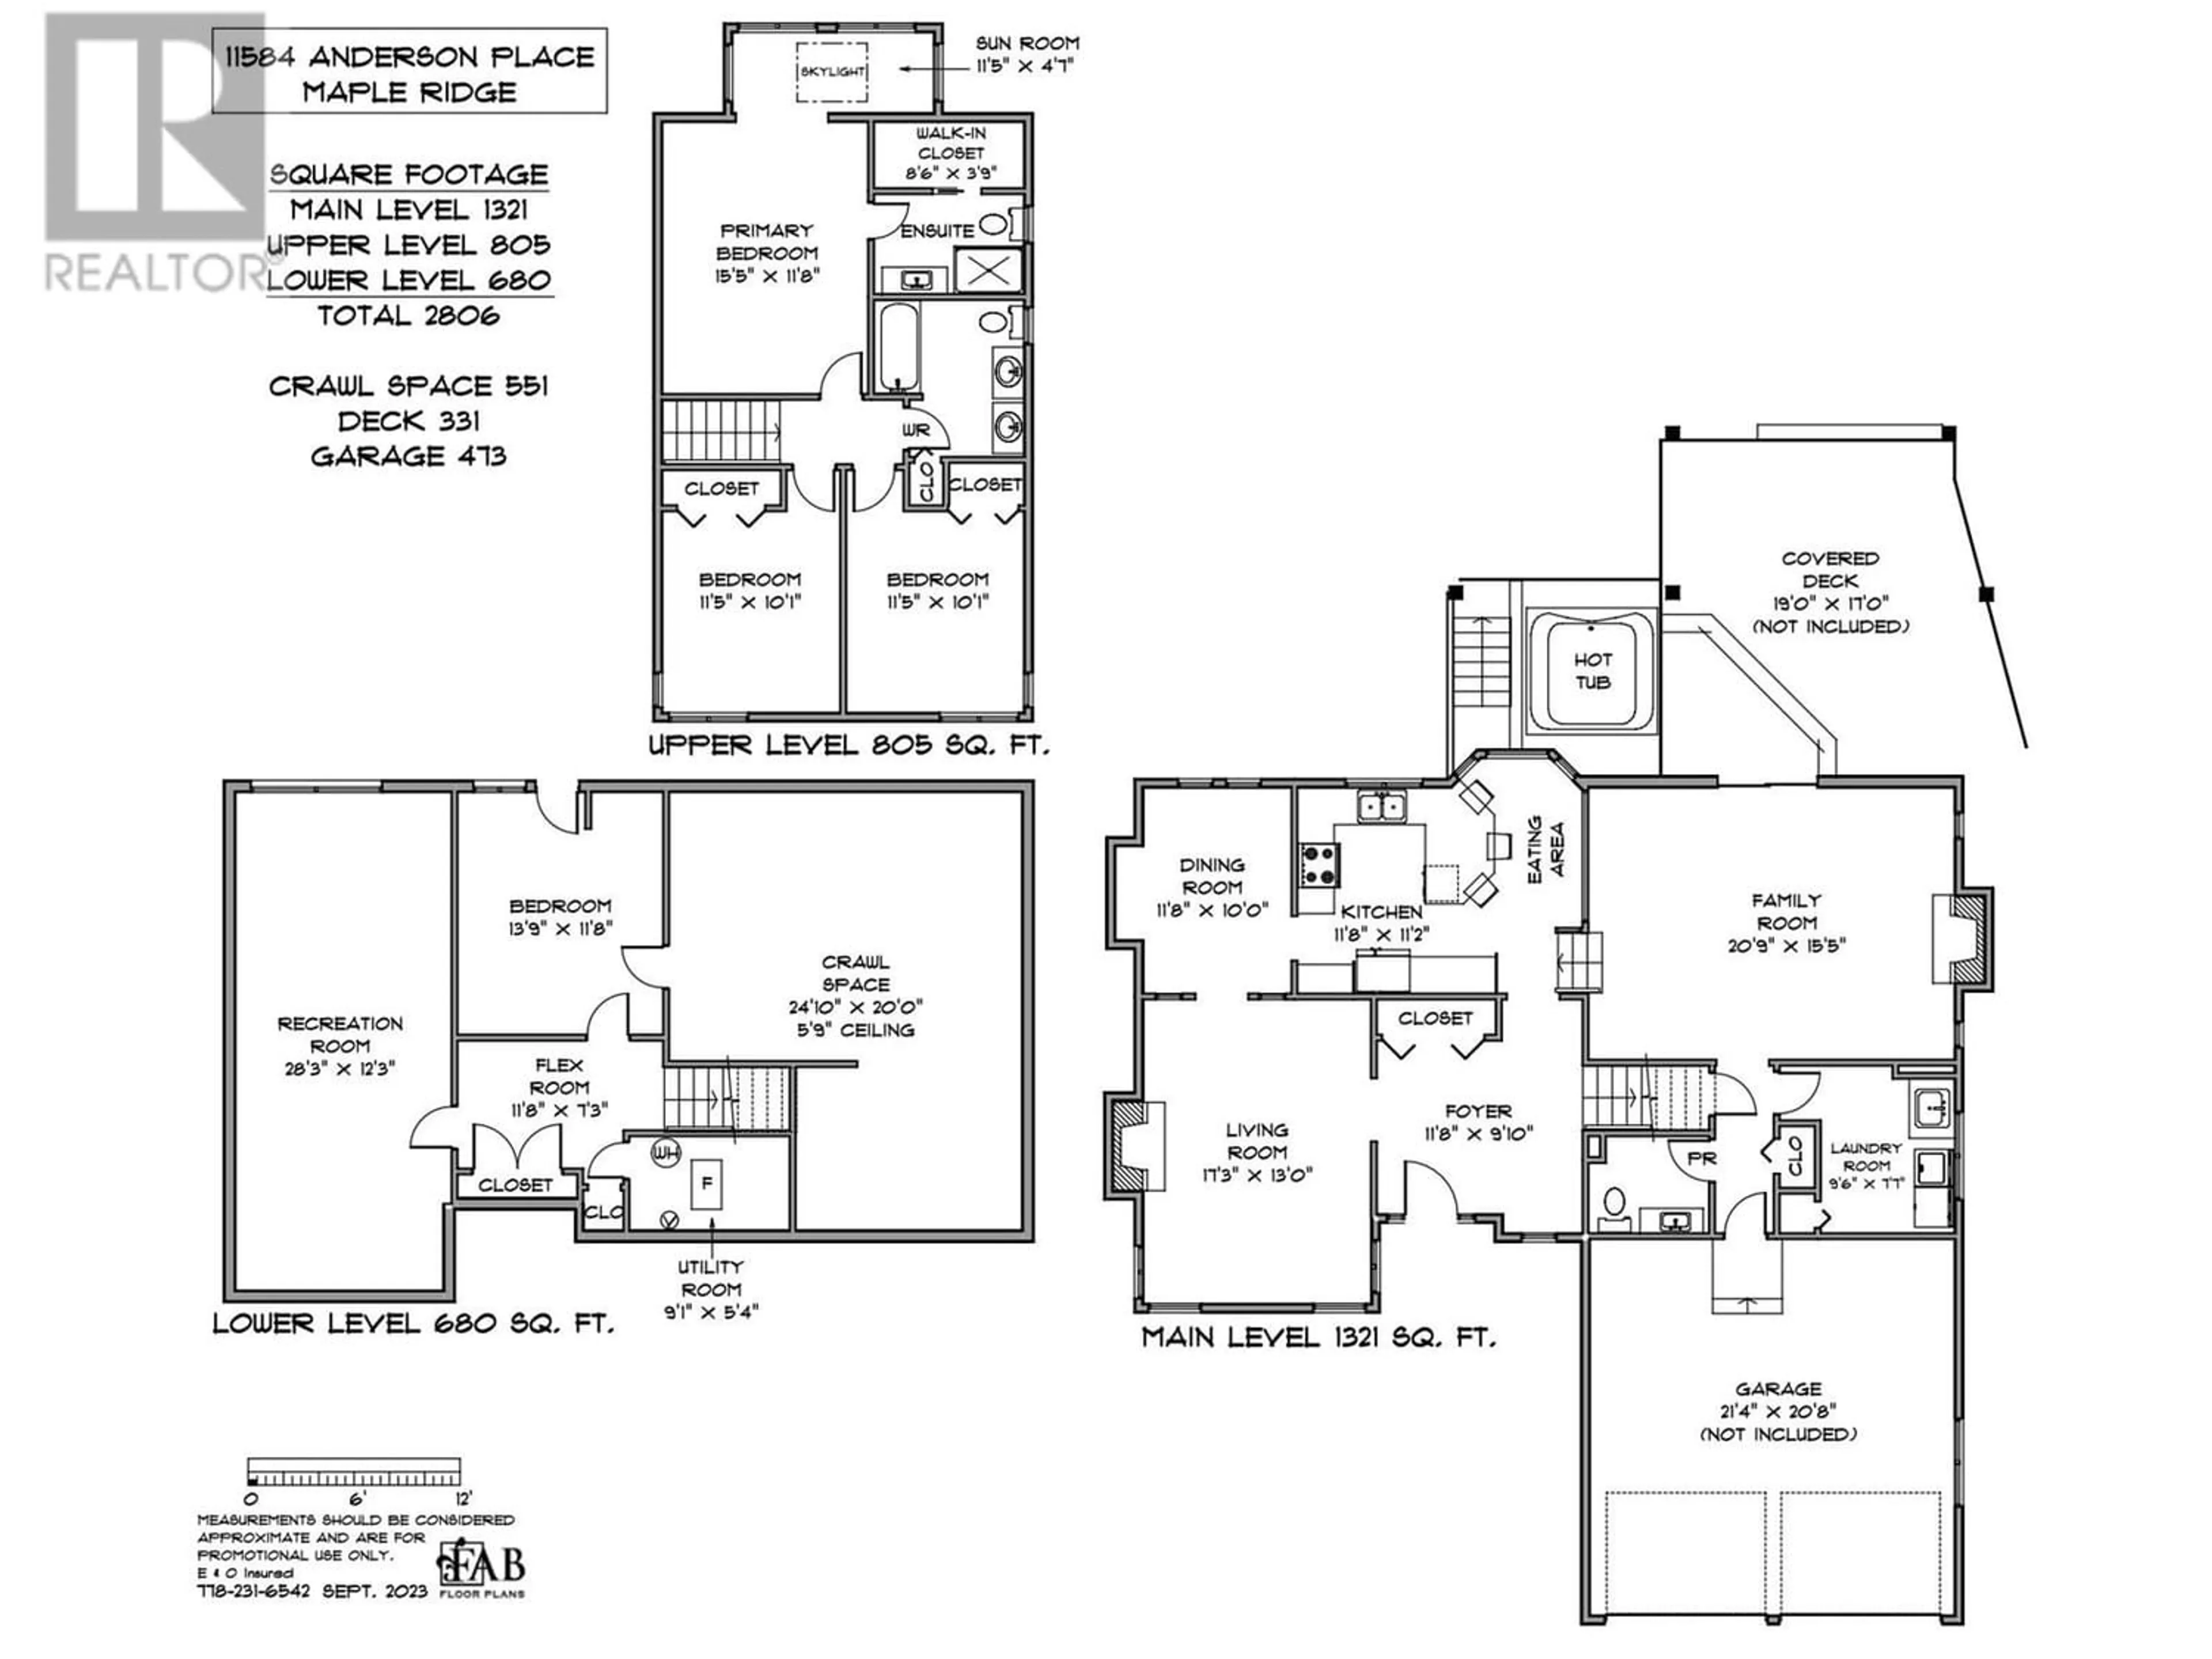 Floor plan for 11584 ANDERSON PLACE, Maple Ridge British Columbia V2X8N3